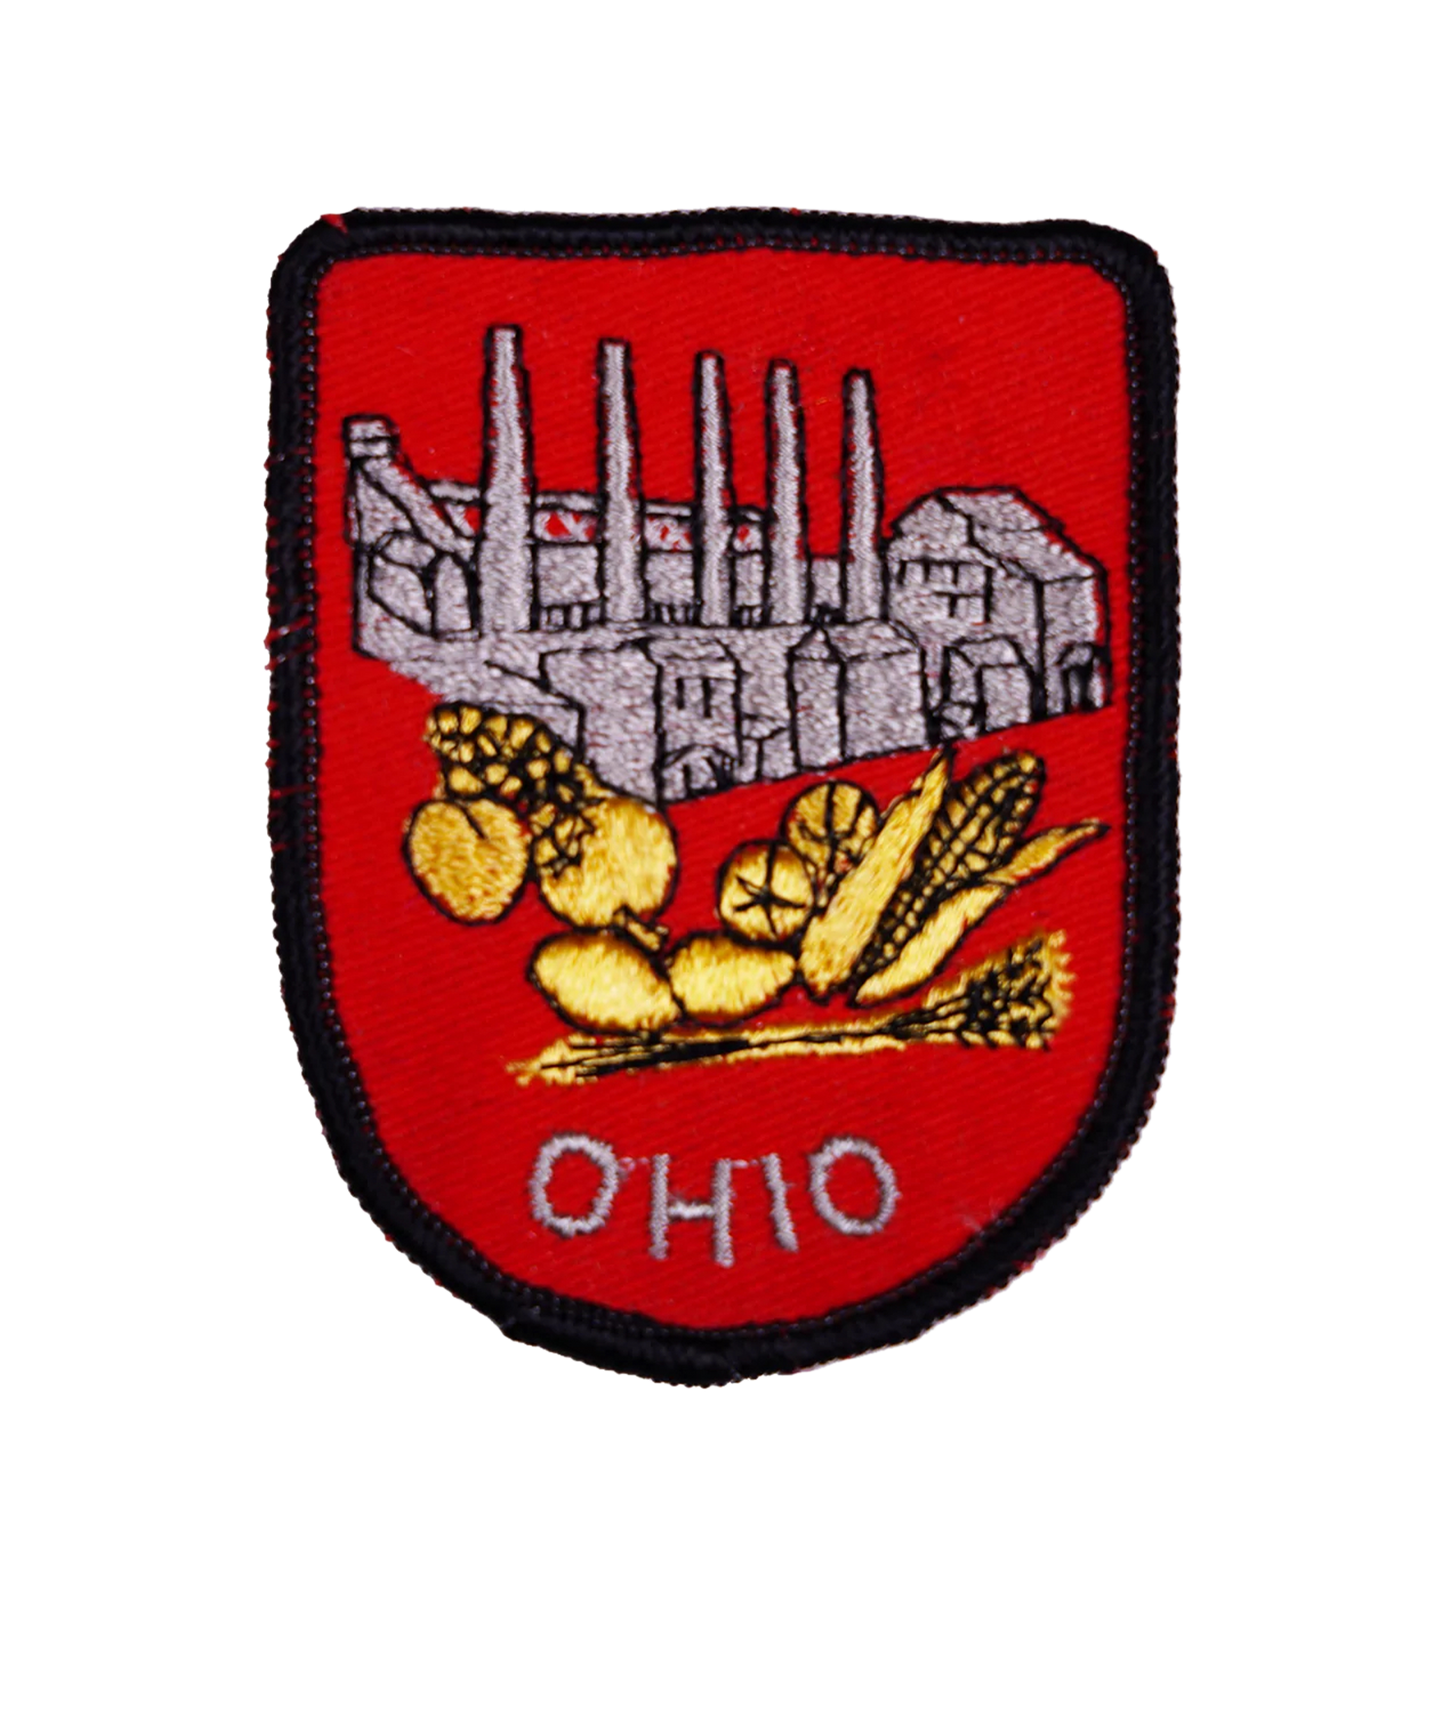 Vintage Ohio Embroidered Patch